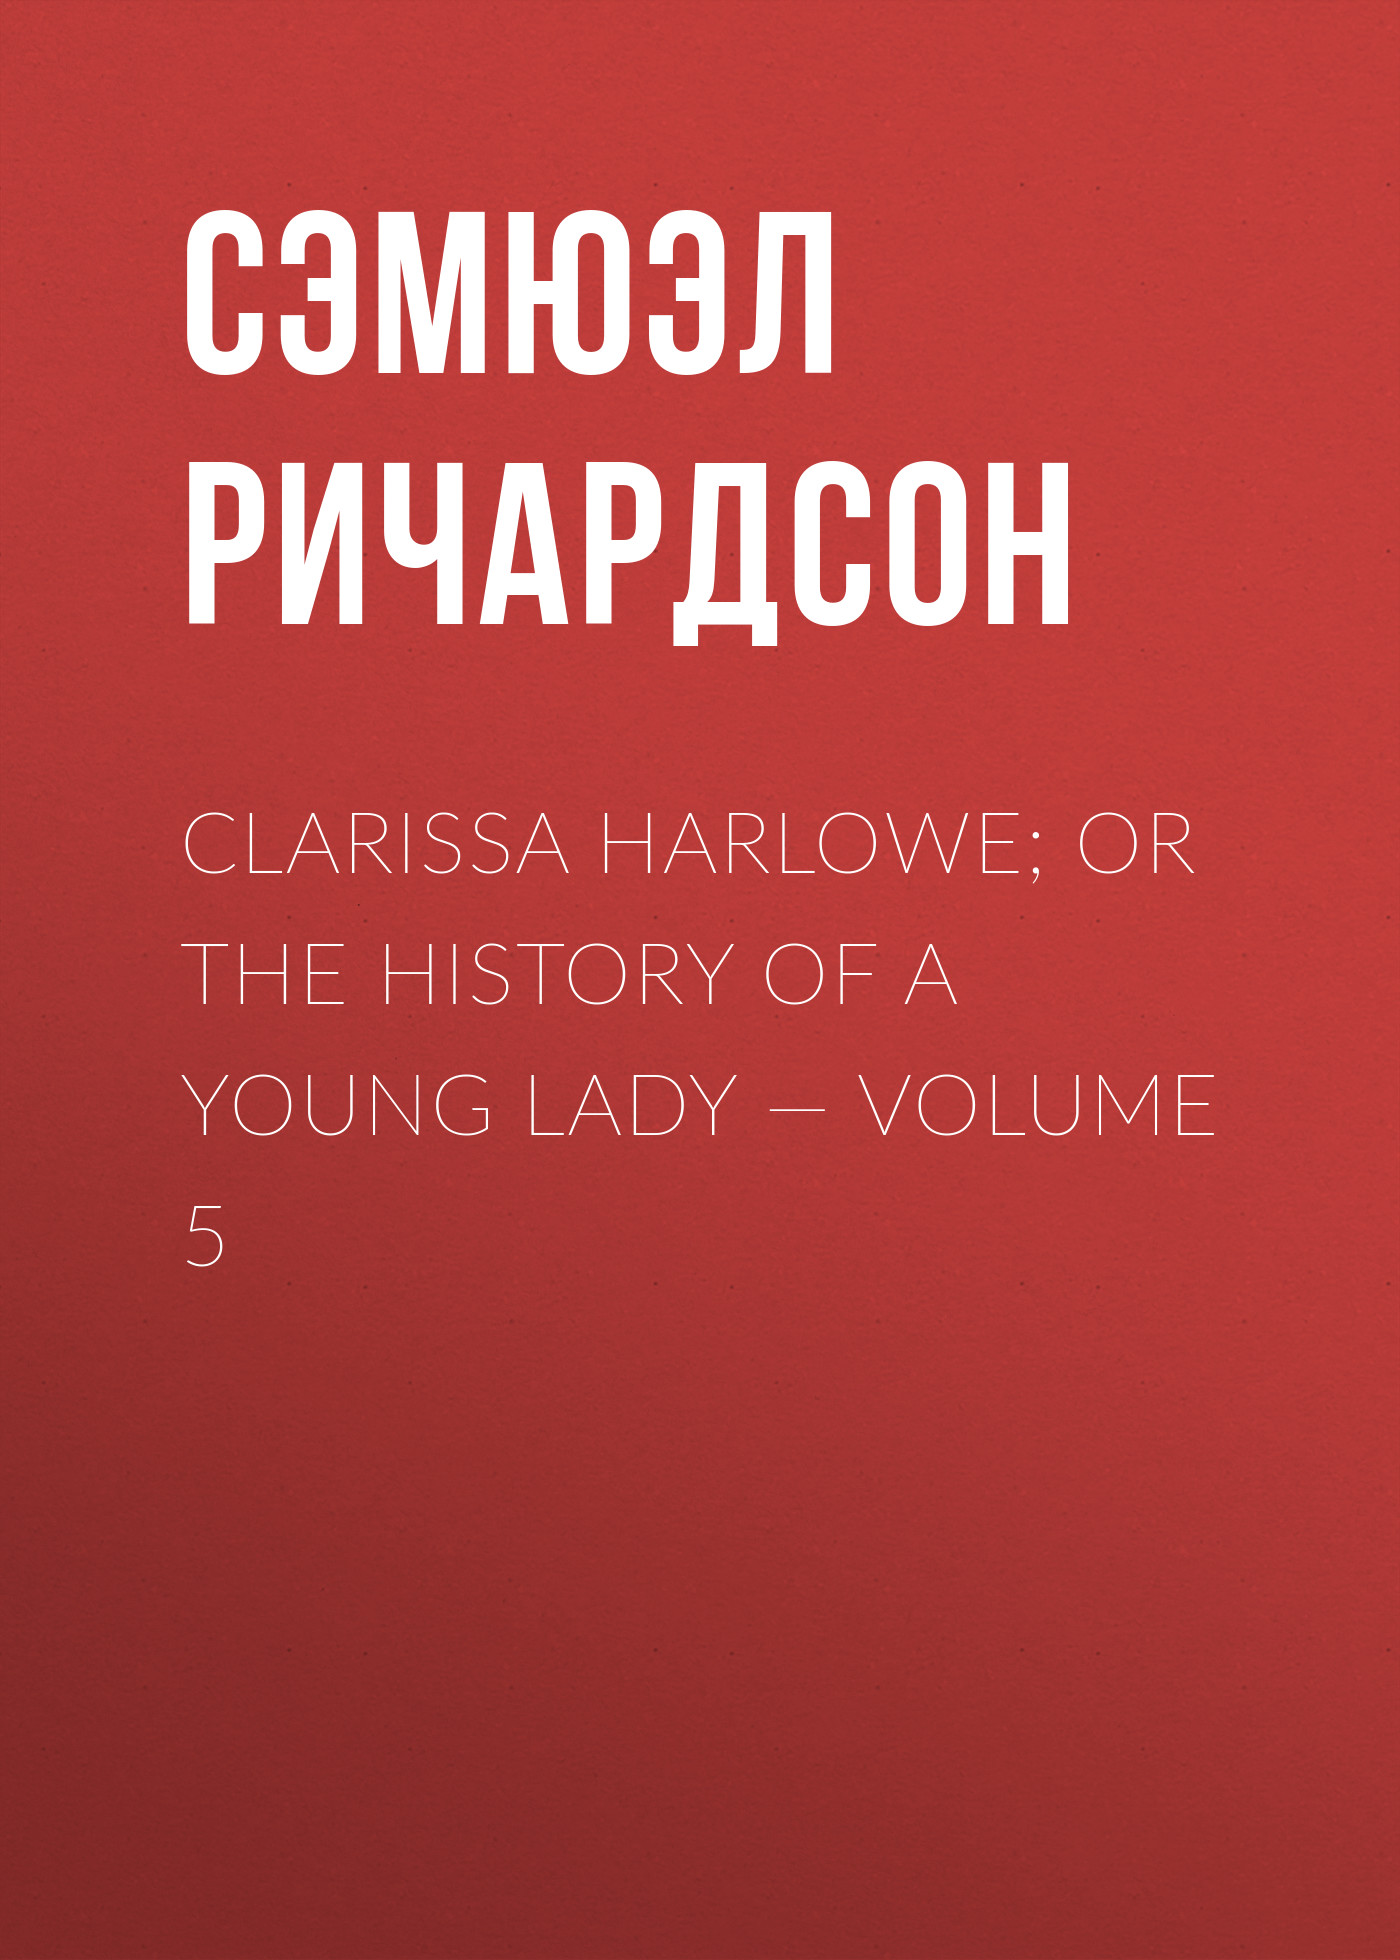 Clarissa Harlowe; or the history of a young lady— Volume 5